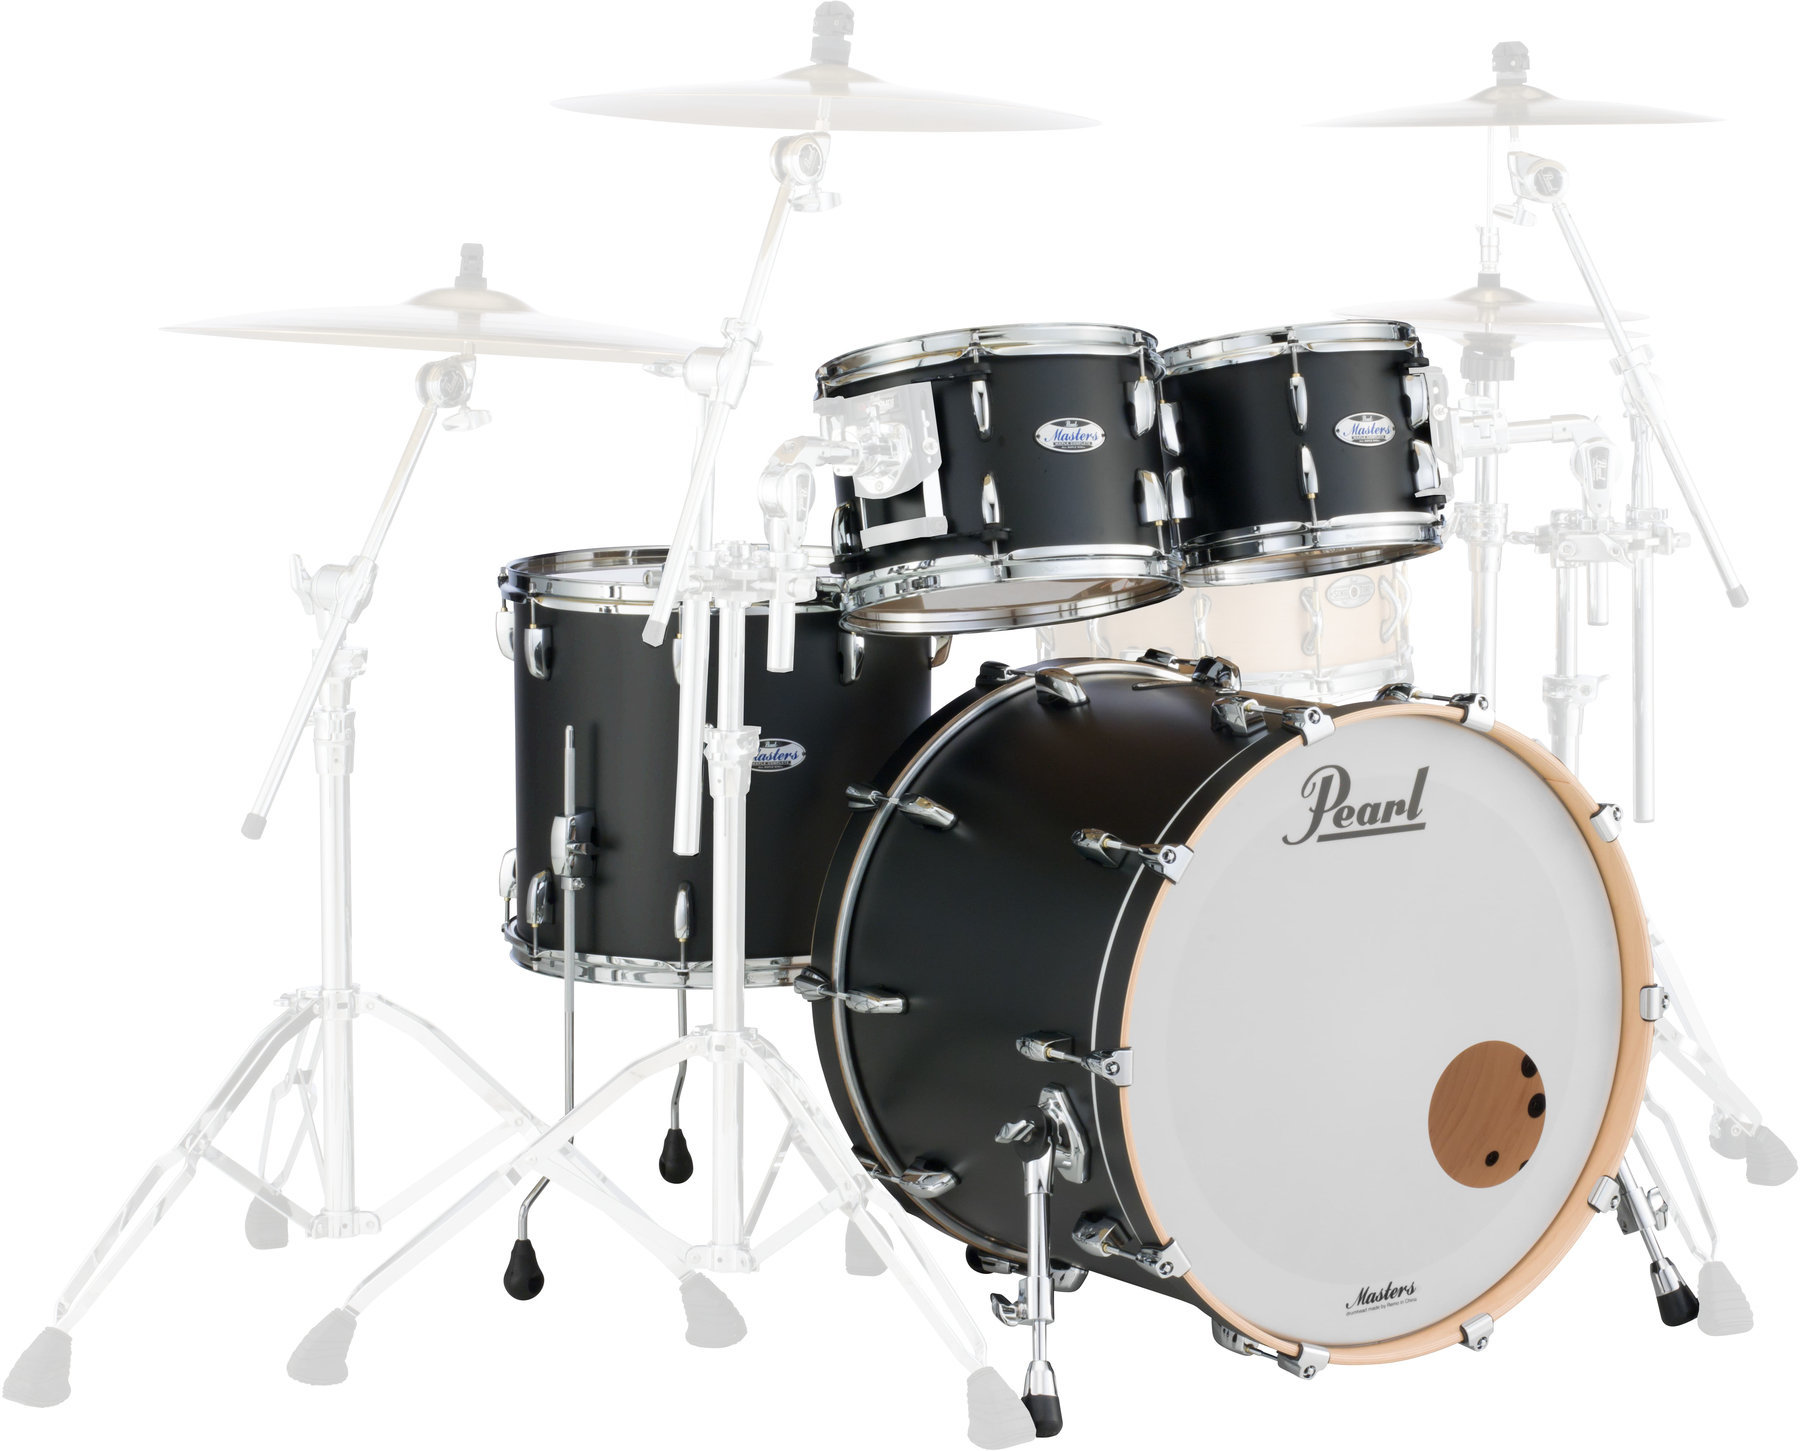 Akustik-Drumset Pearl MCT924XEFP-C339 Masters Maple Complete Matte Caviar Black